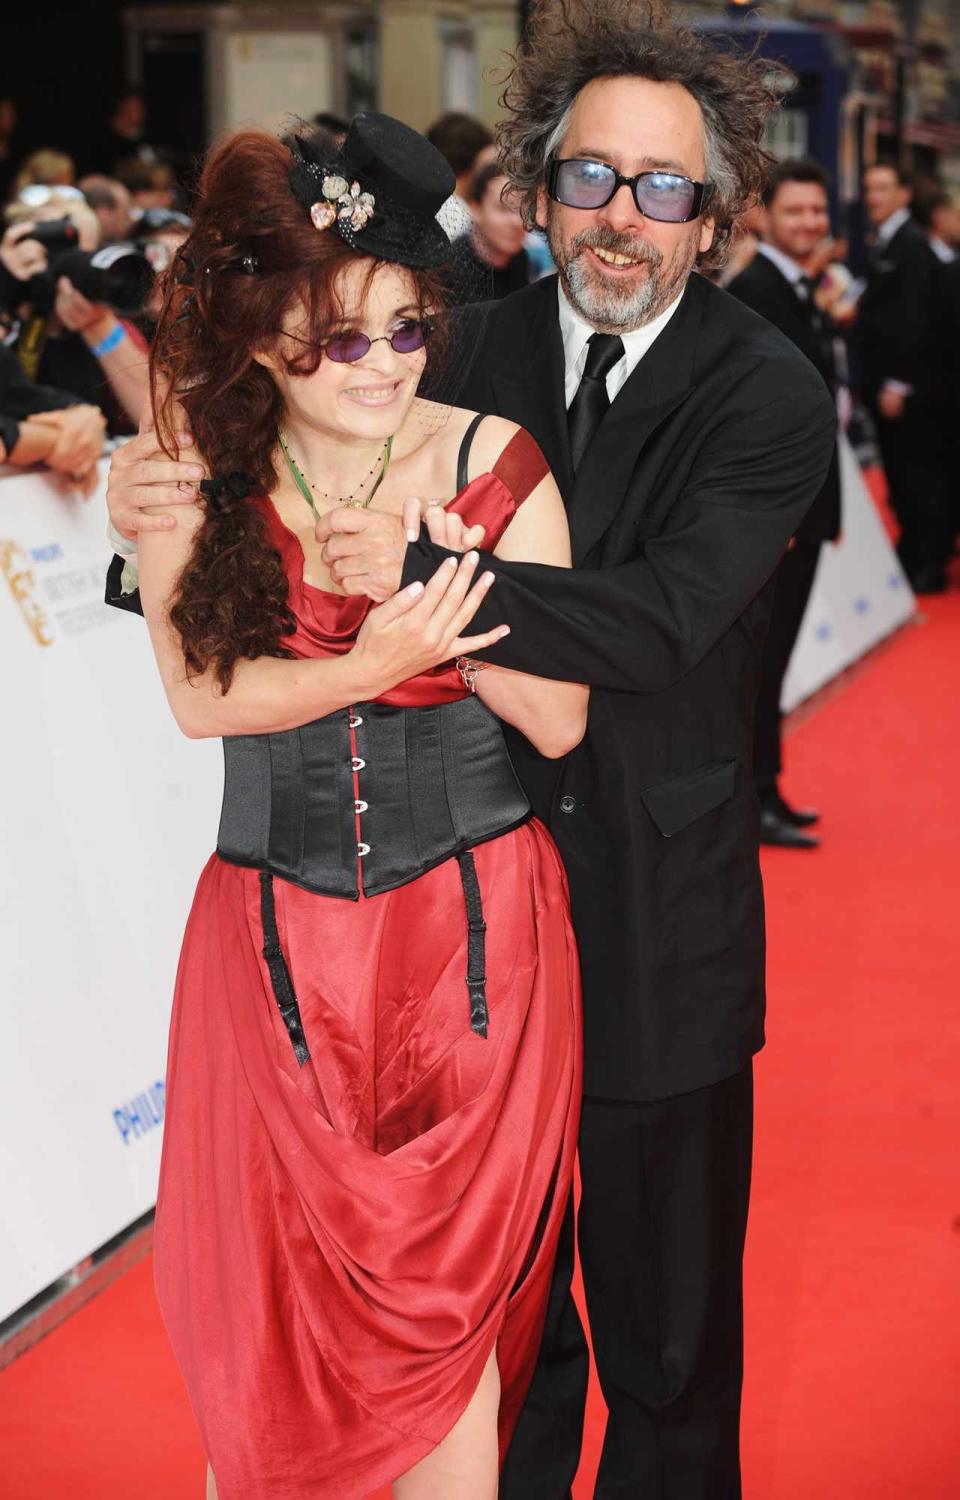 Tim Burton and his wife Helena Bonham Carter arrive for the Philips British Academy Television Awards at the London Palladium on June 6, 2010 in London, England